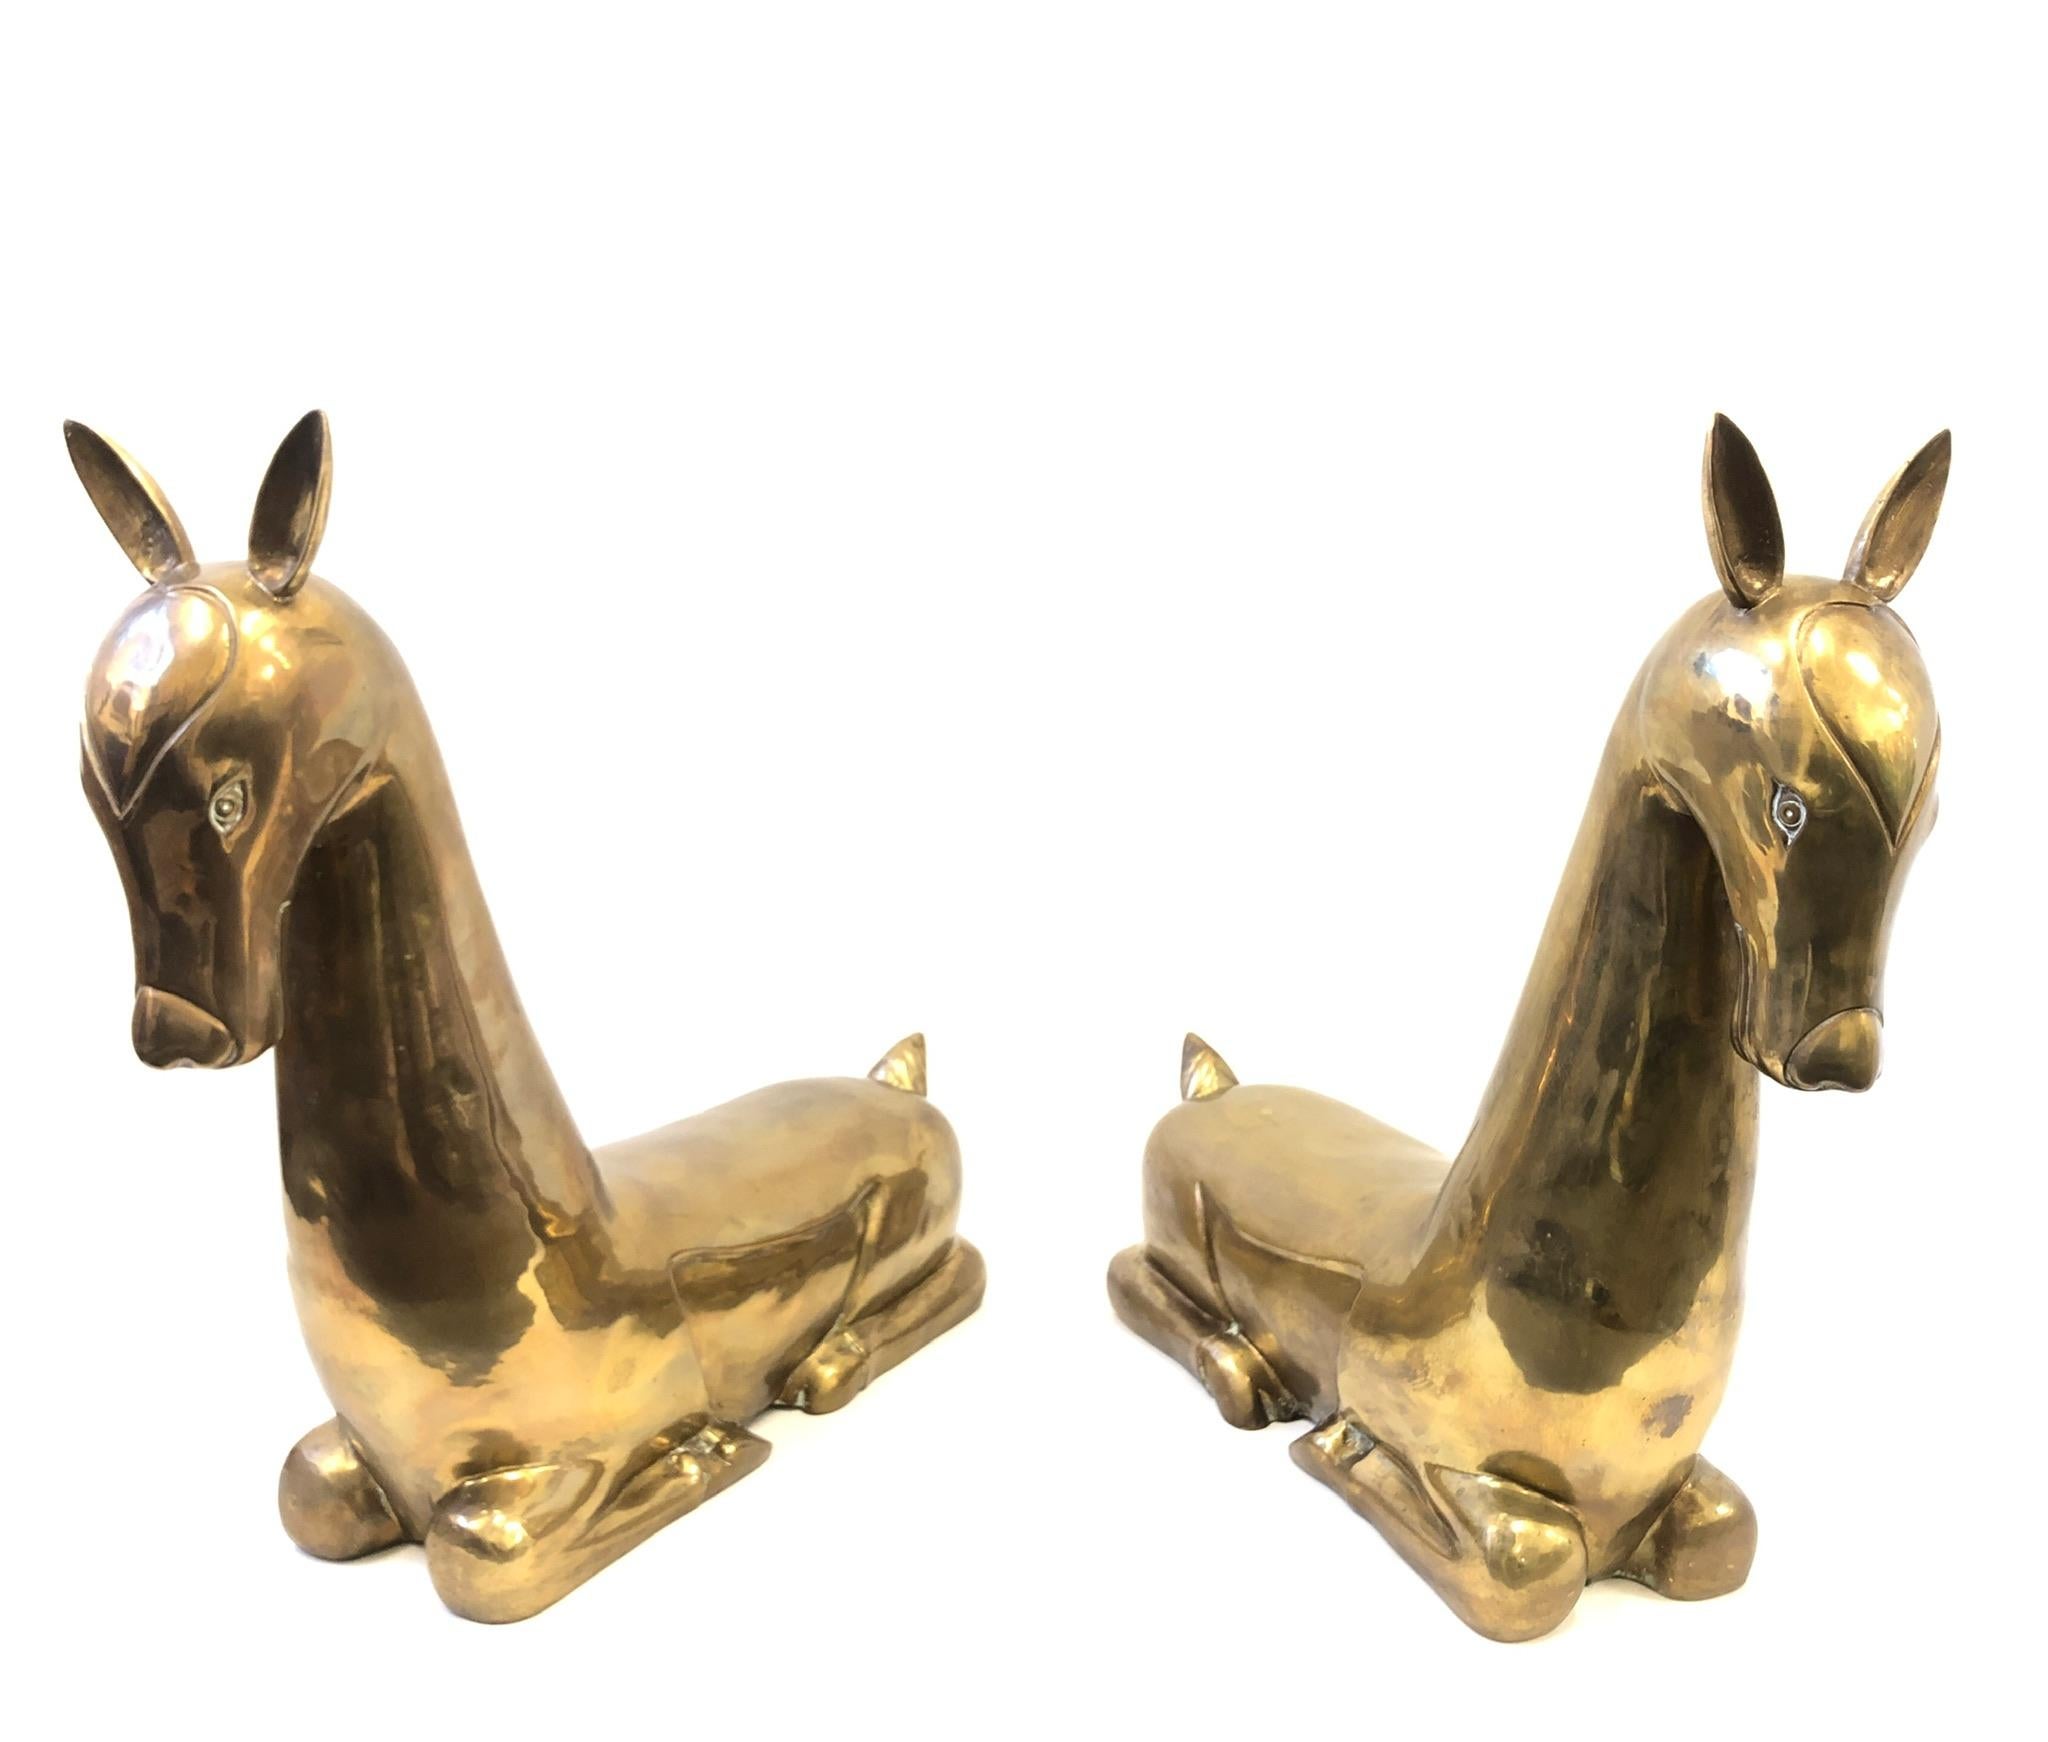 Pair of large stylized brass deer sculptures from the 1970s. The sculpture have an aged brass finish, they can be polished if desired. Each sculpture is 34.75” high 37” wide 12” deep.